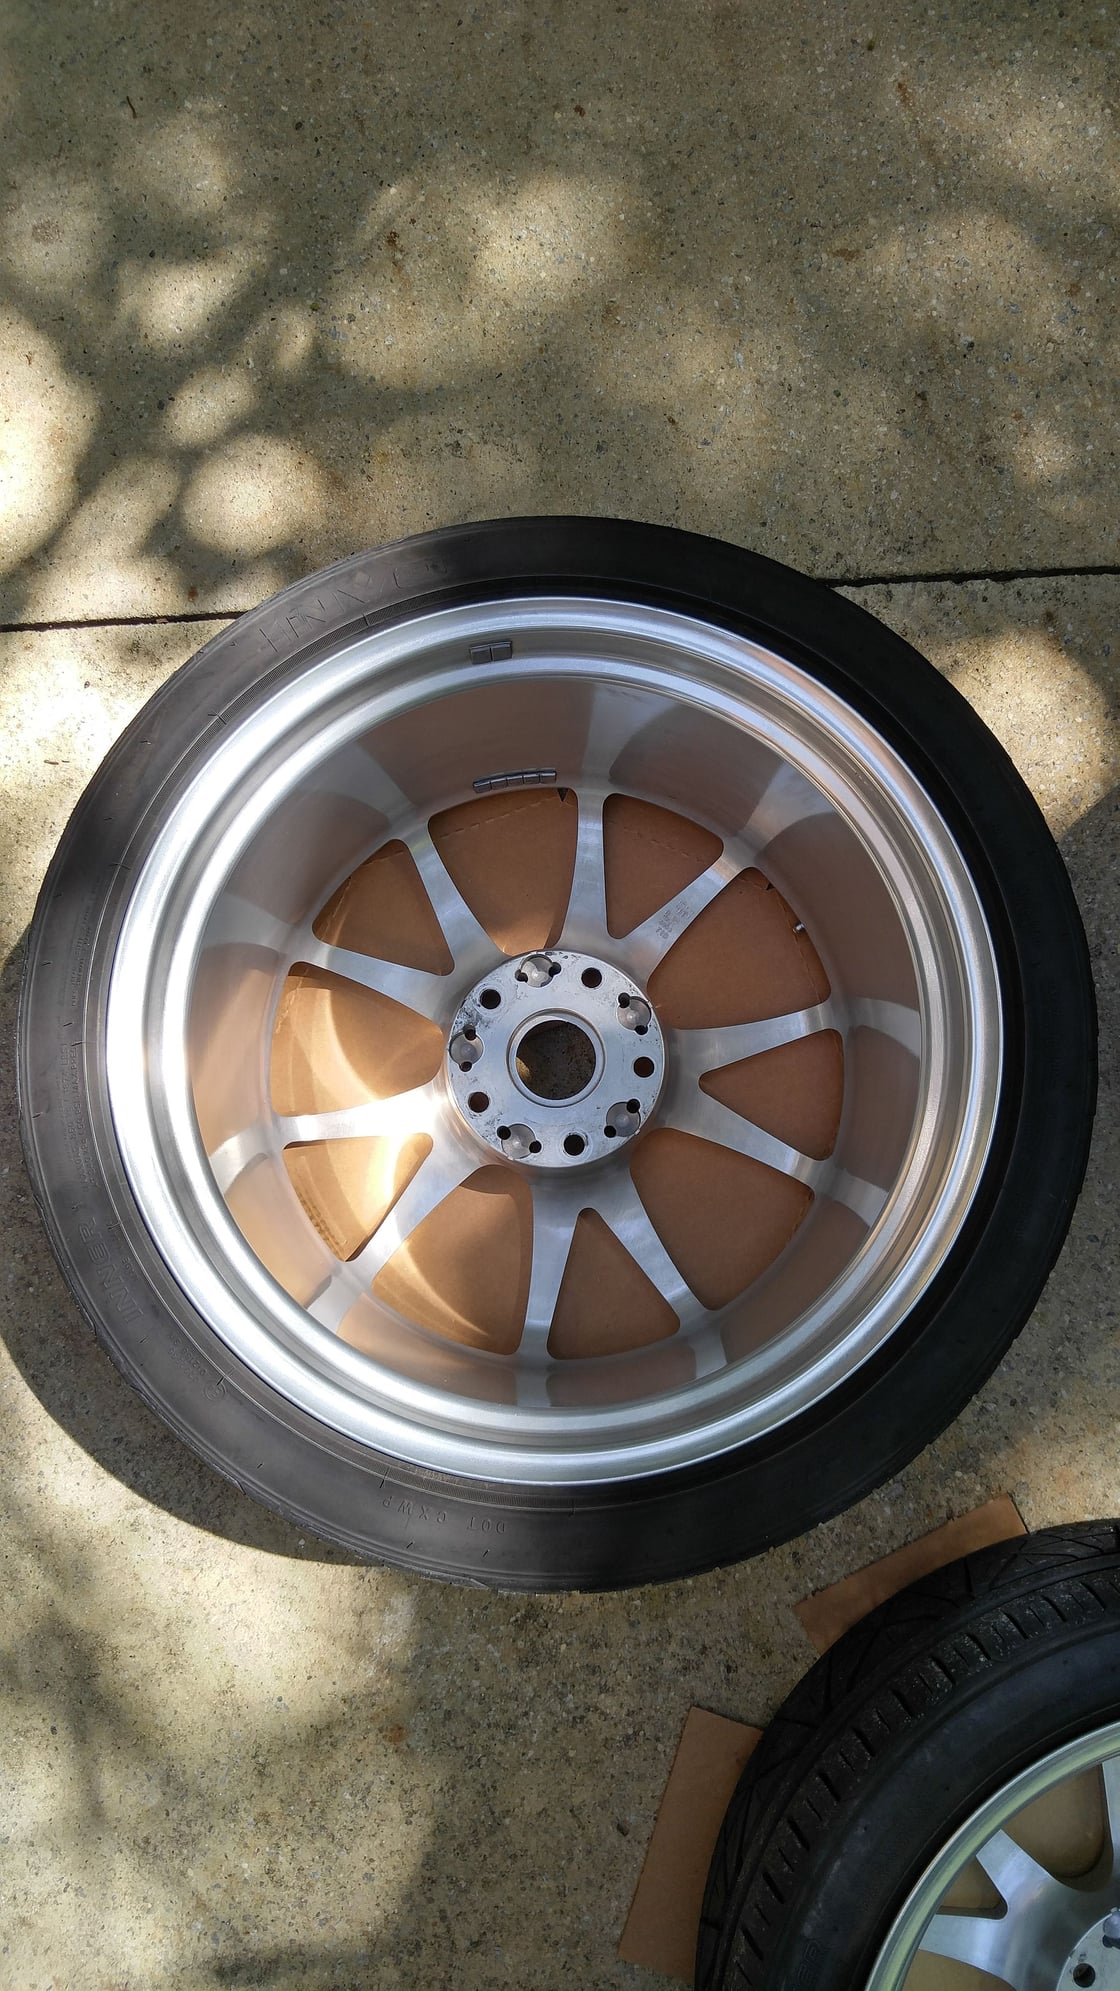 Wheels and Tires/Axles - FS: NLA 19" Champion RS171 wheels in NB fitment - fully polished & clear powdercoated - Used - 1999 to 2019 Porsche Carrera - Seneca, SC 29672, United States